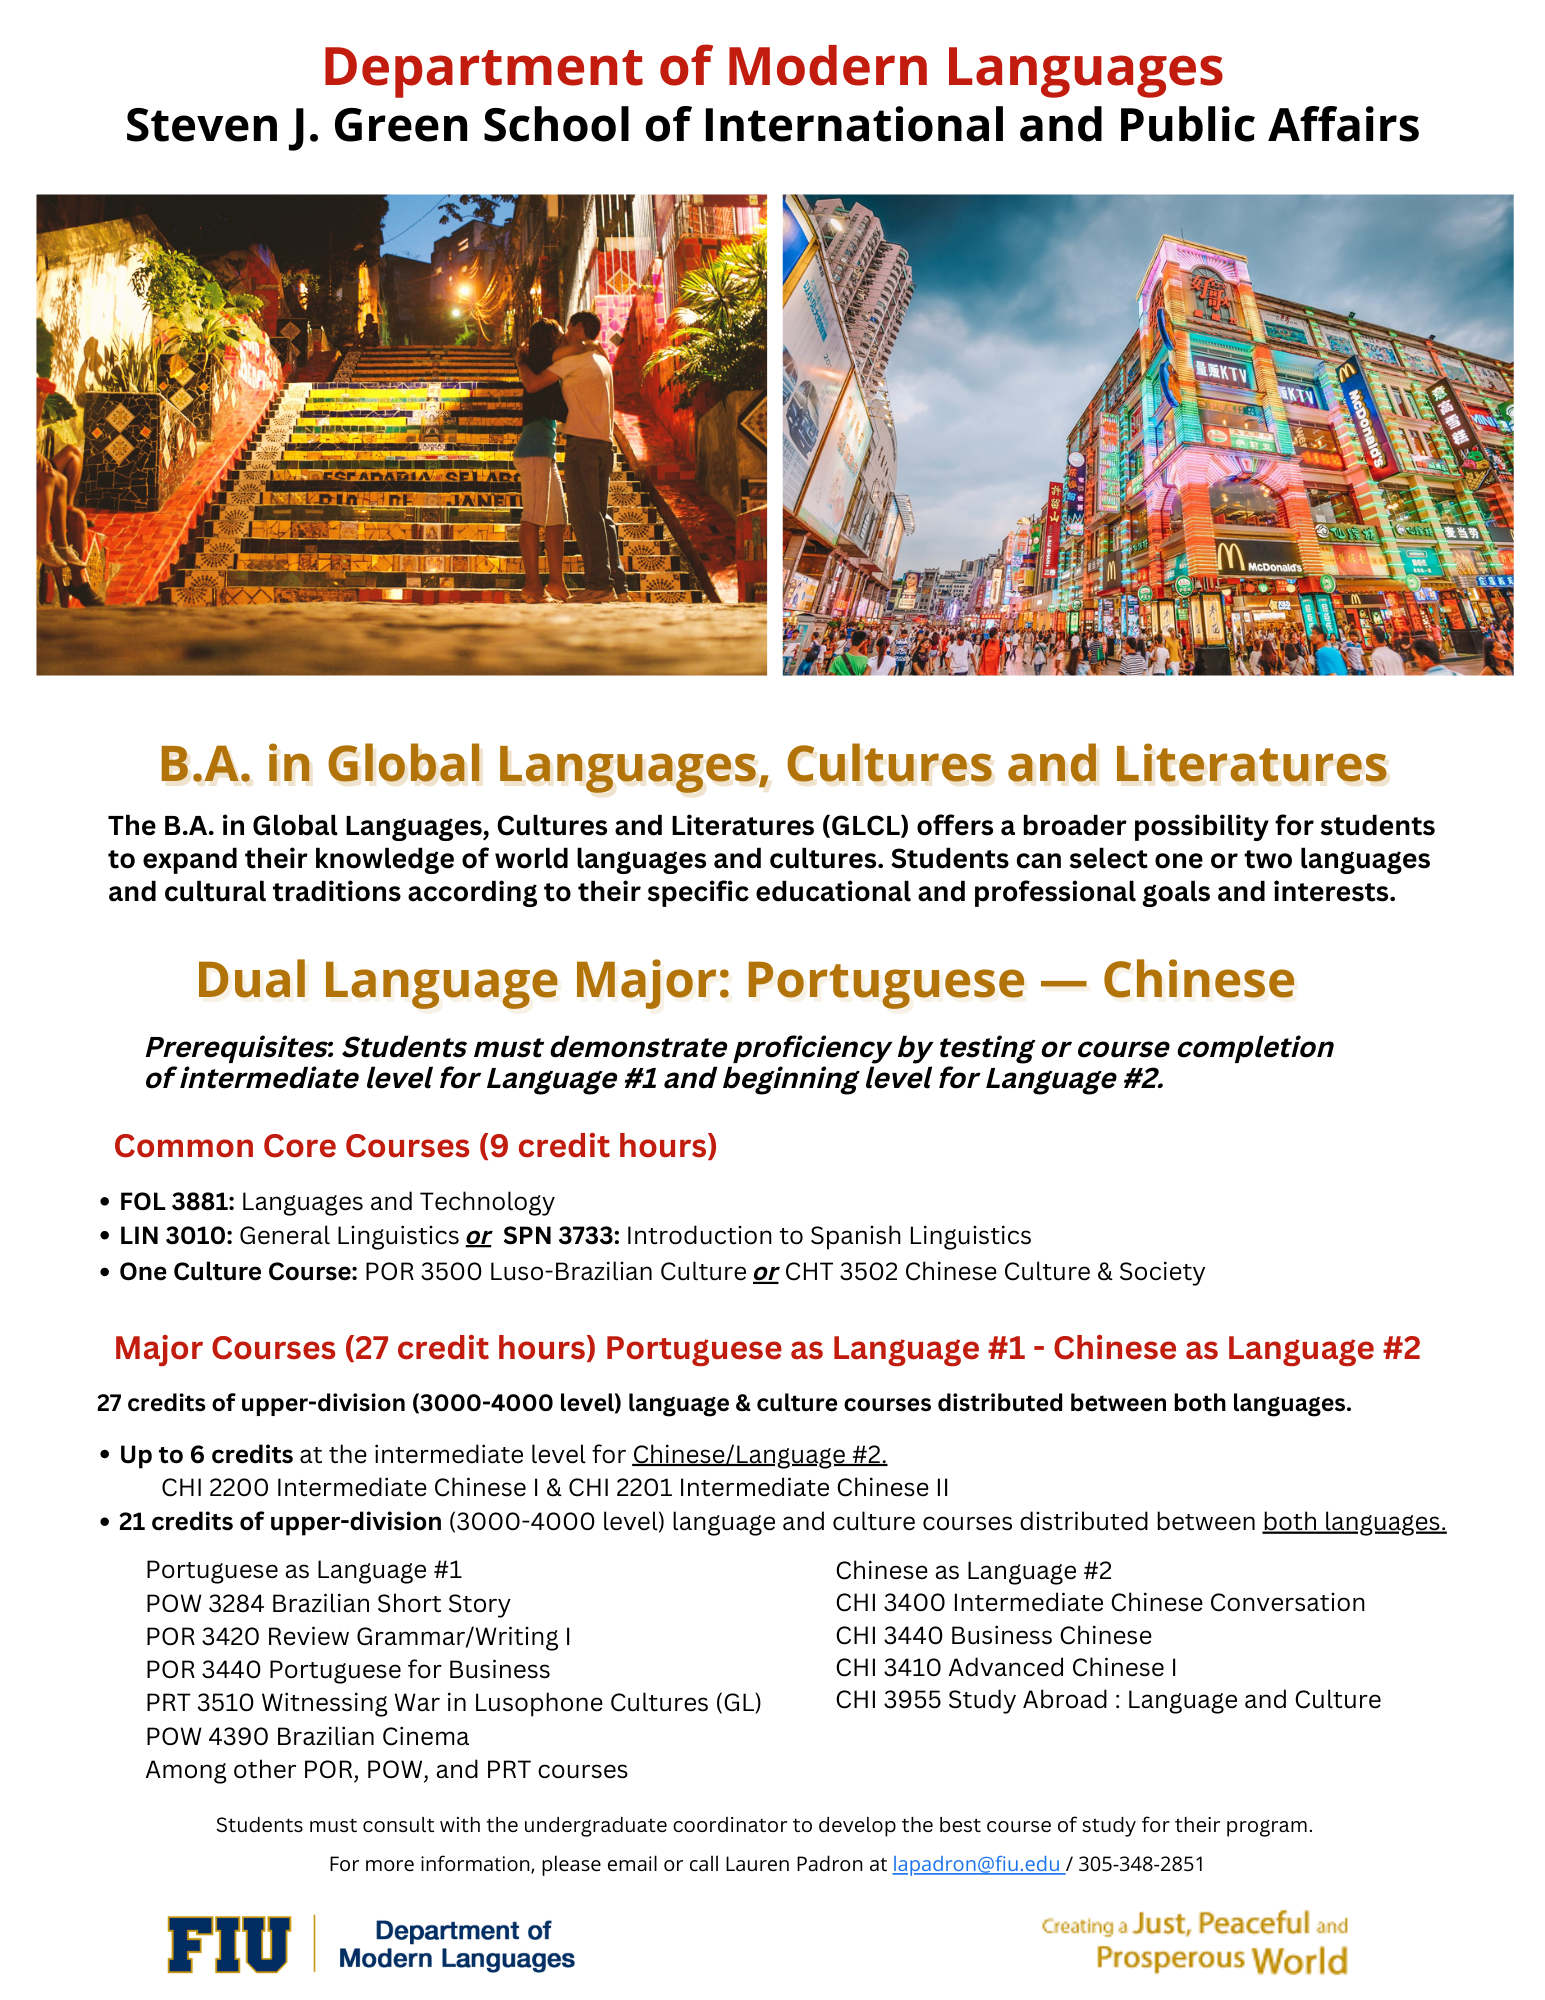 portuguesechinese-flyer.png